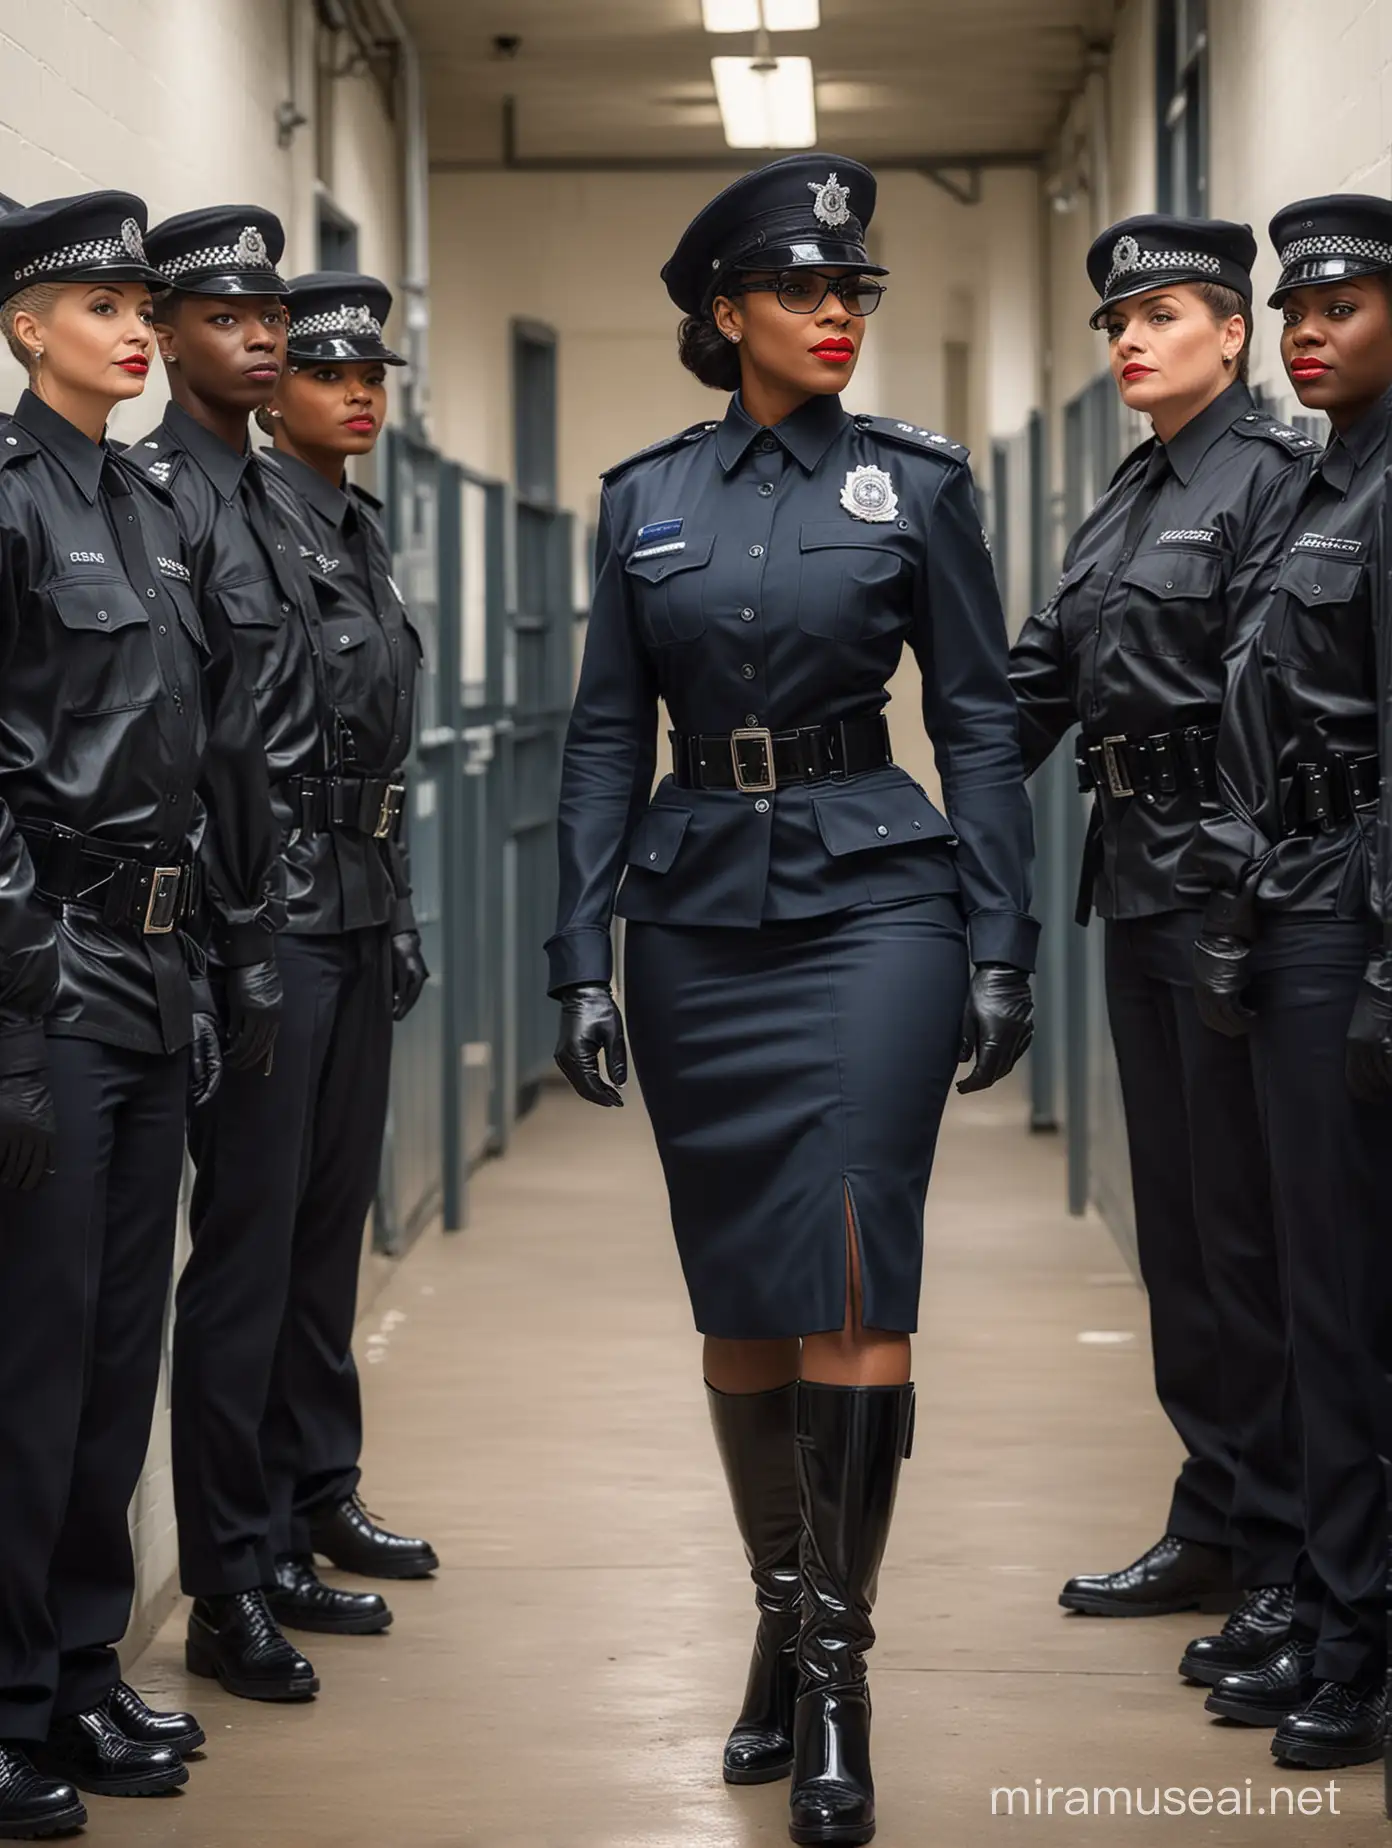 Confident Black Female British Police Officer Commands Obedience from Submissive Male Prisoners in Correctional Facility